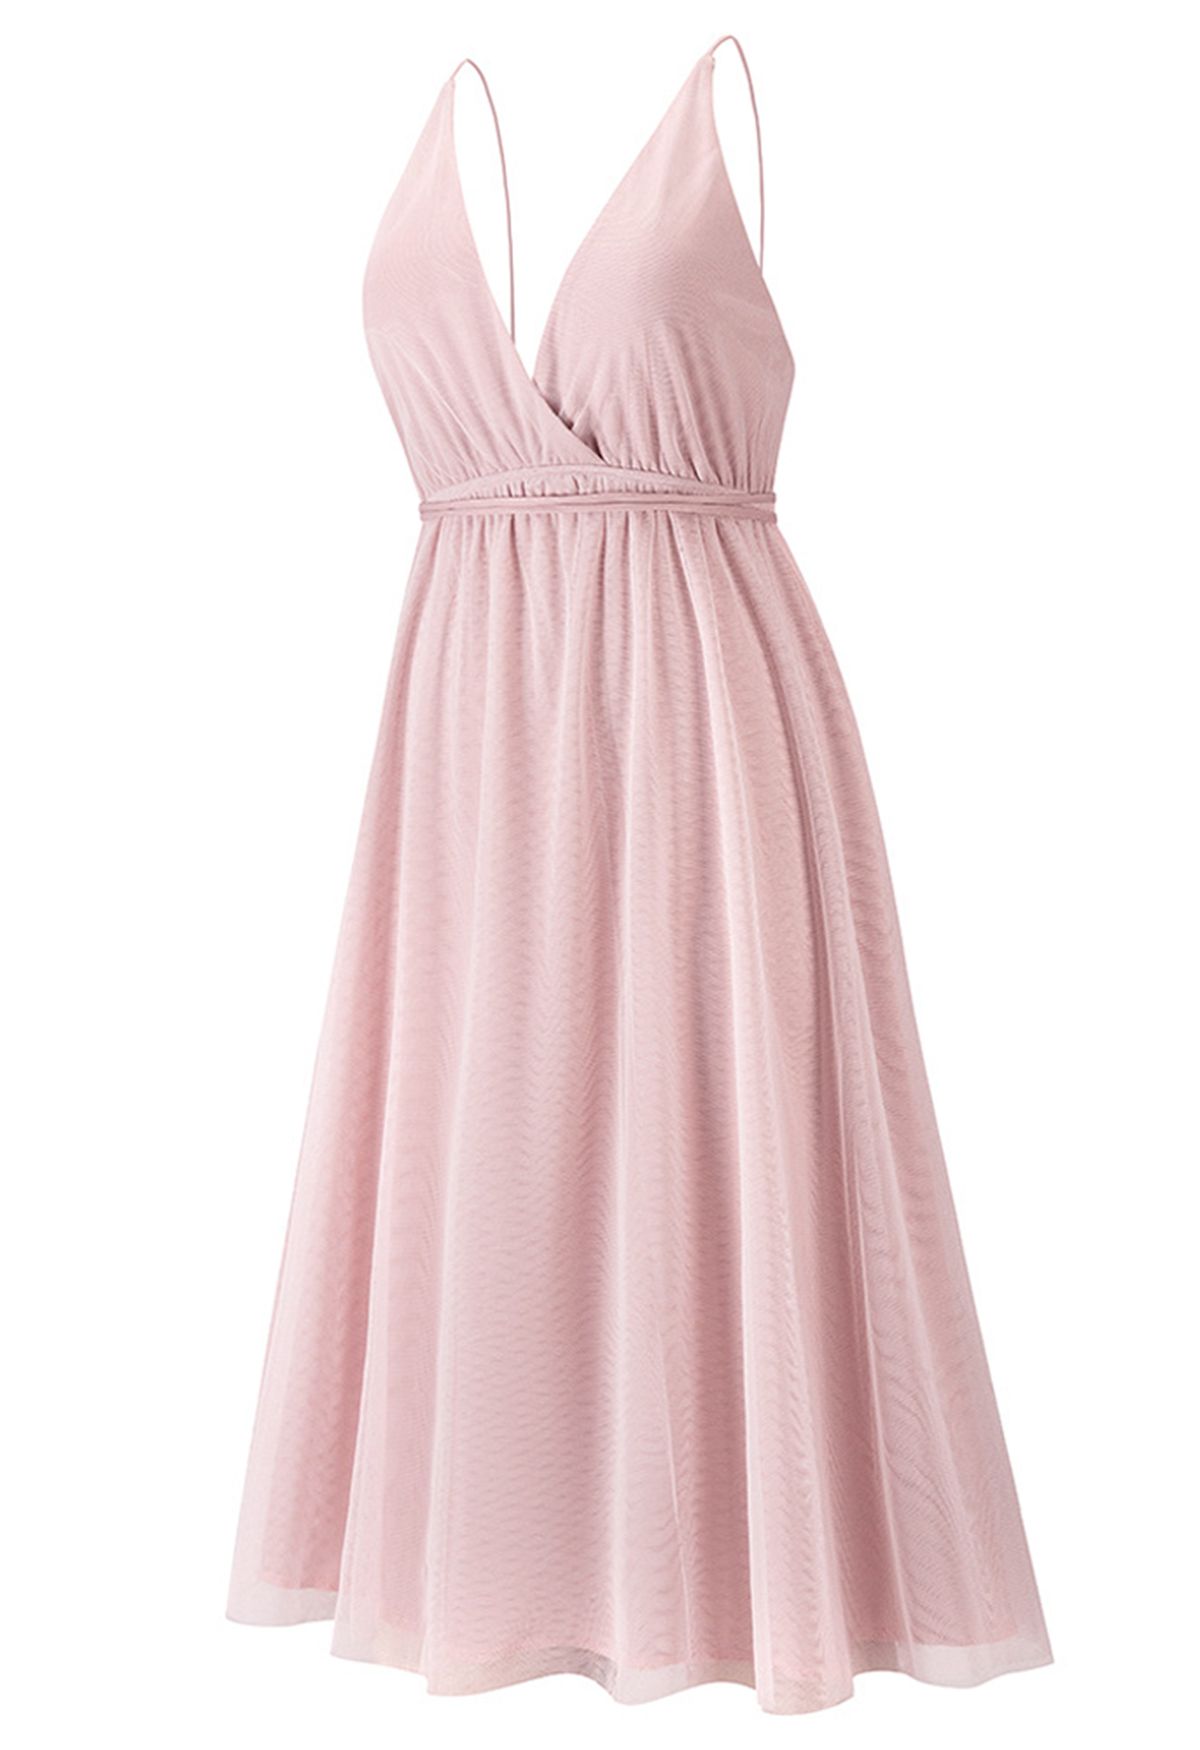 Crisscross Open Back Wrap Mesh Tulle Dress in Pink - Retro, Indie and ...